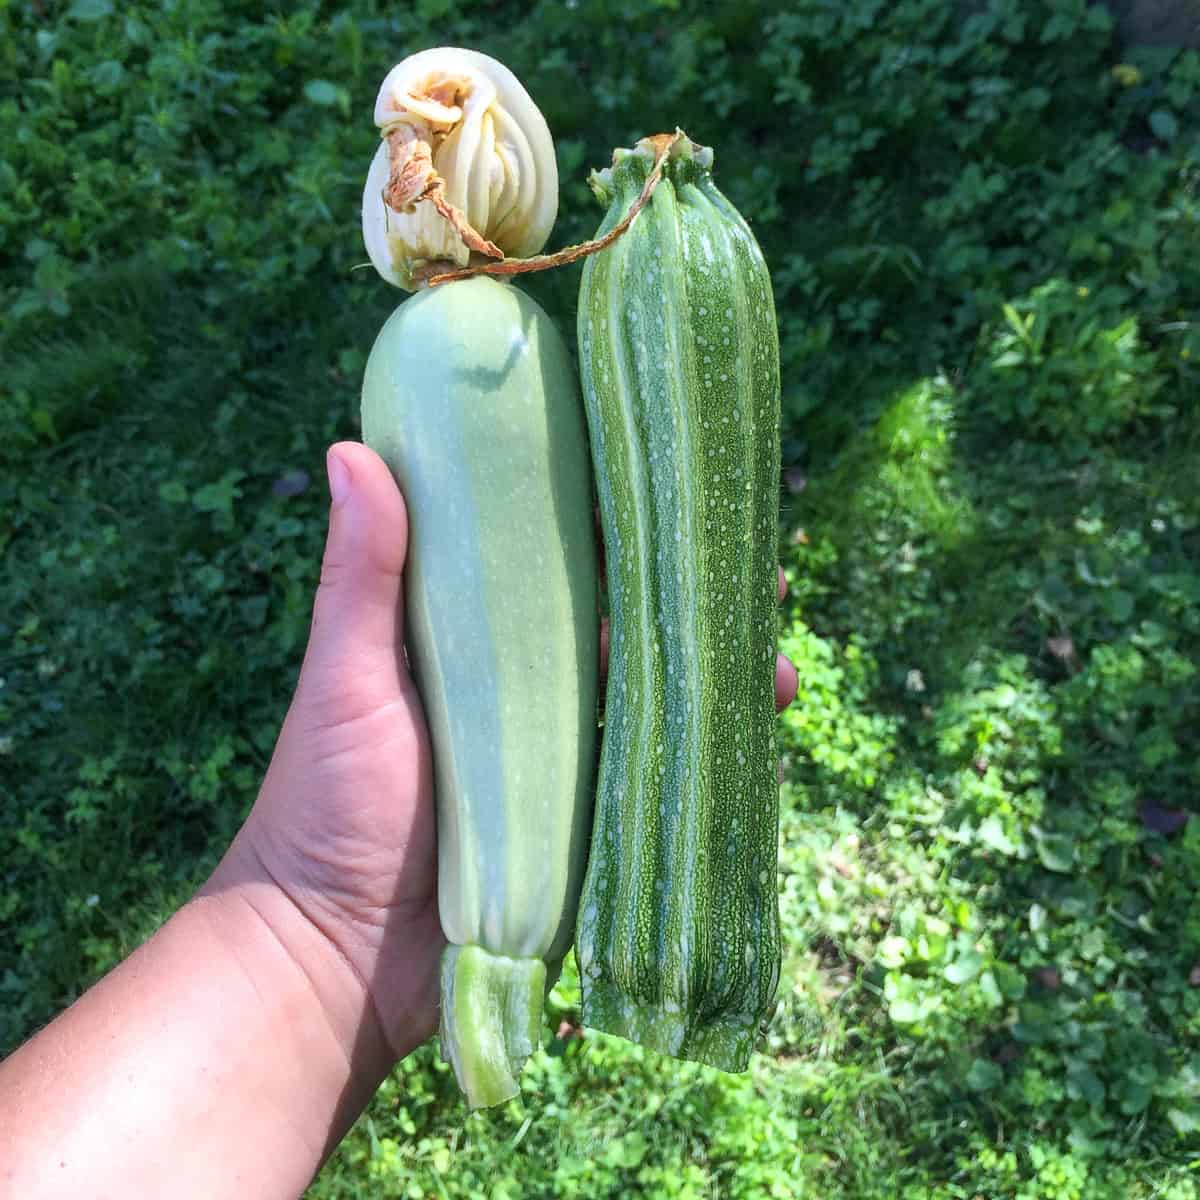 A woman's hand holding two kinds of squash that she grew and harvested herself.